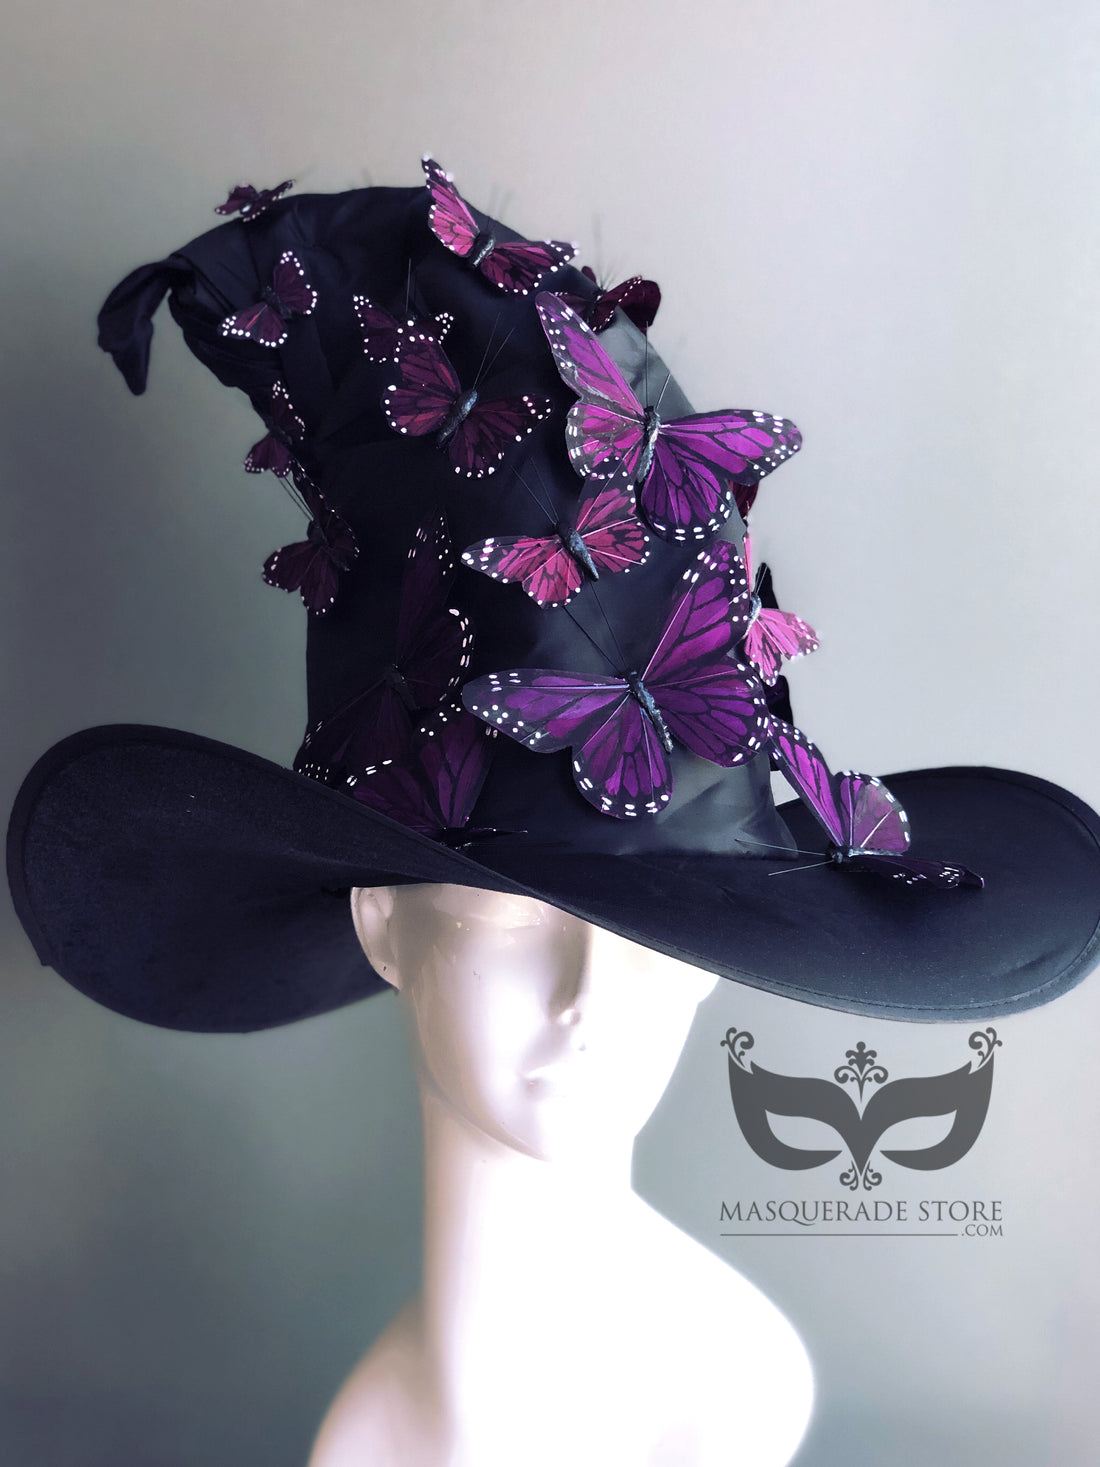 Black witch hat with purple butterflies.